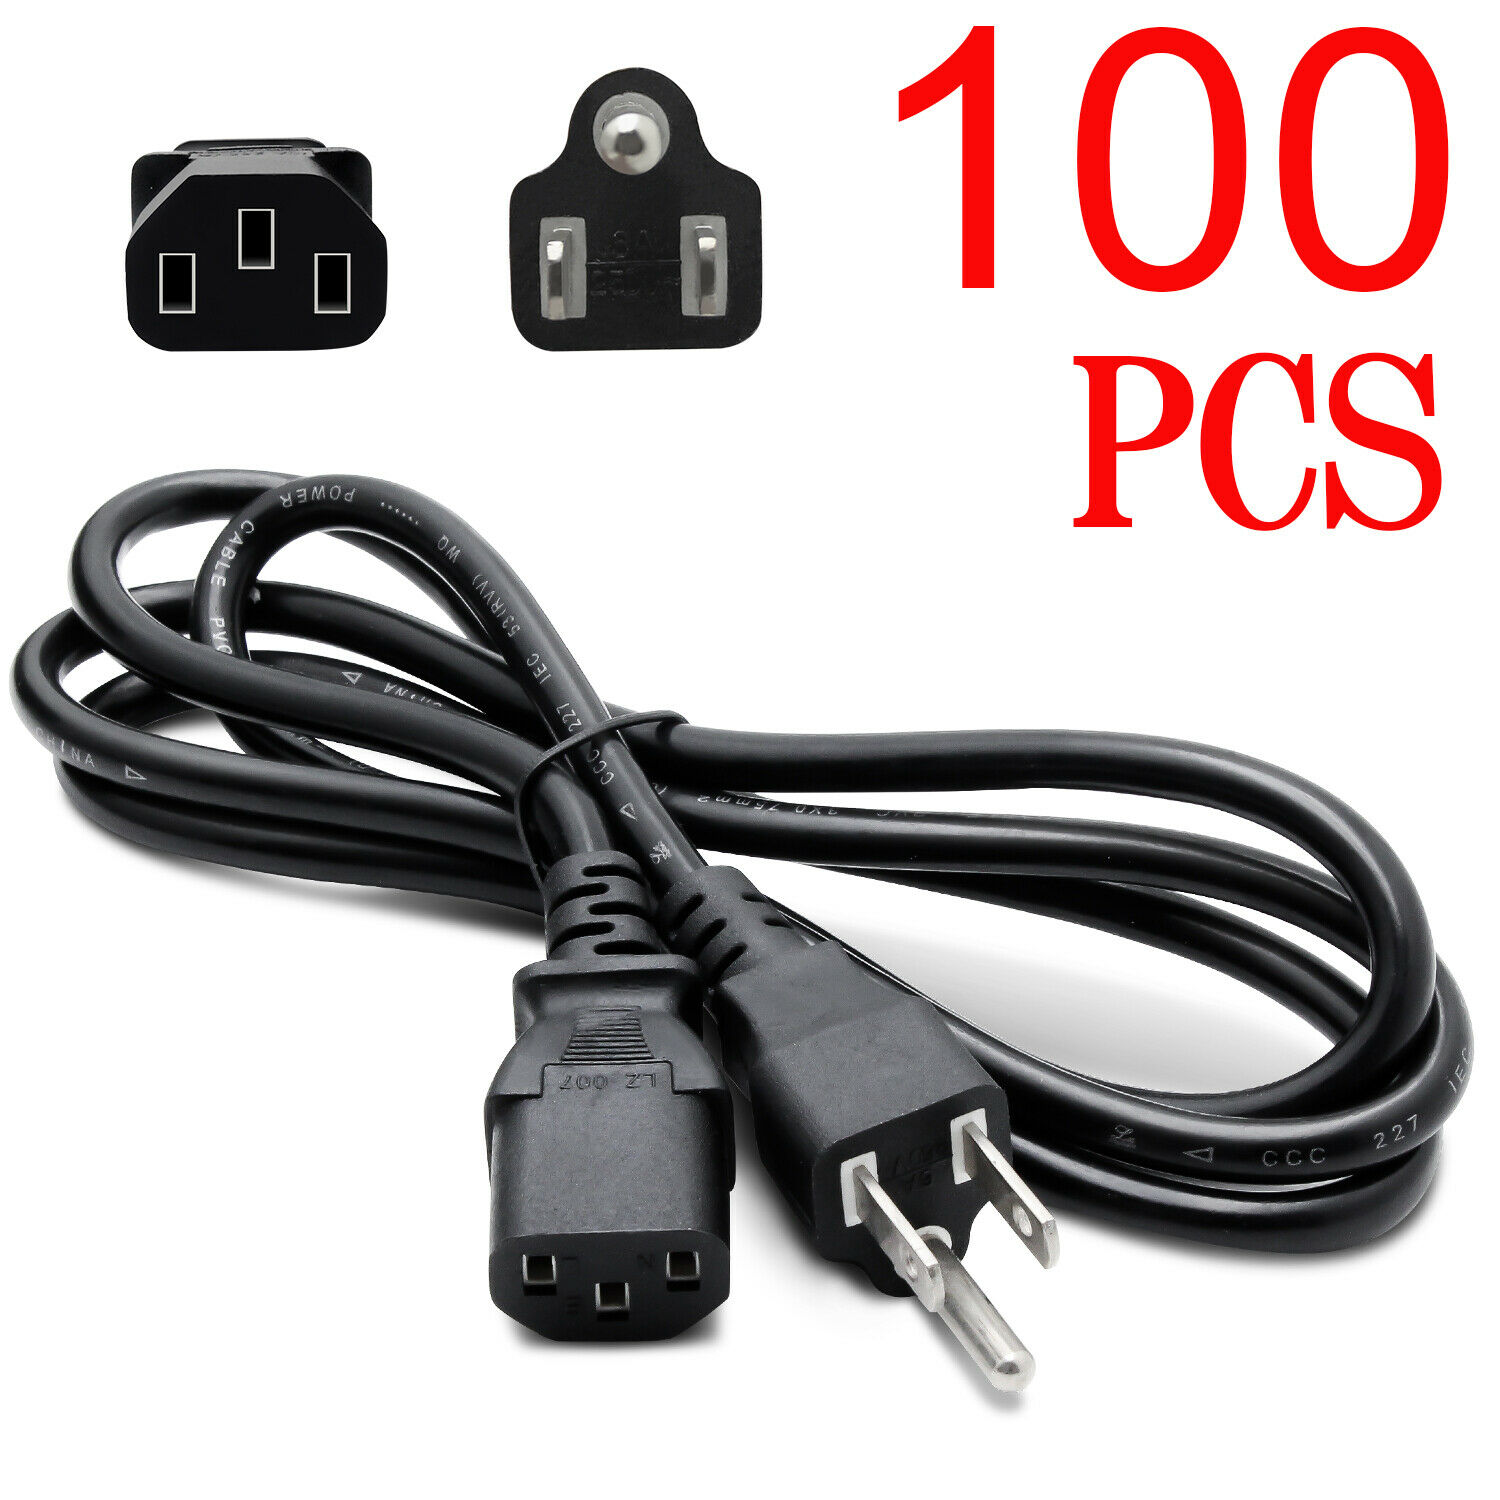 Lot of 100 Standard AC Power Cord Cable Desktop Monitor Computer PC 6ft IEC320